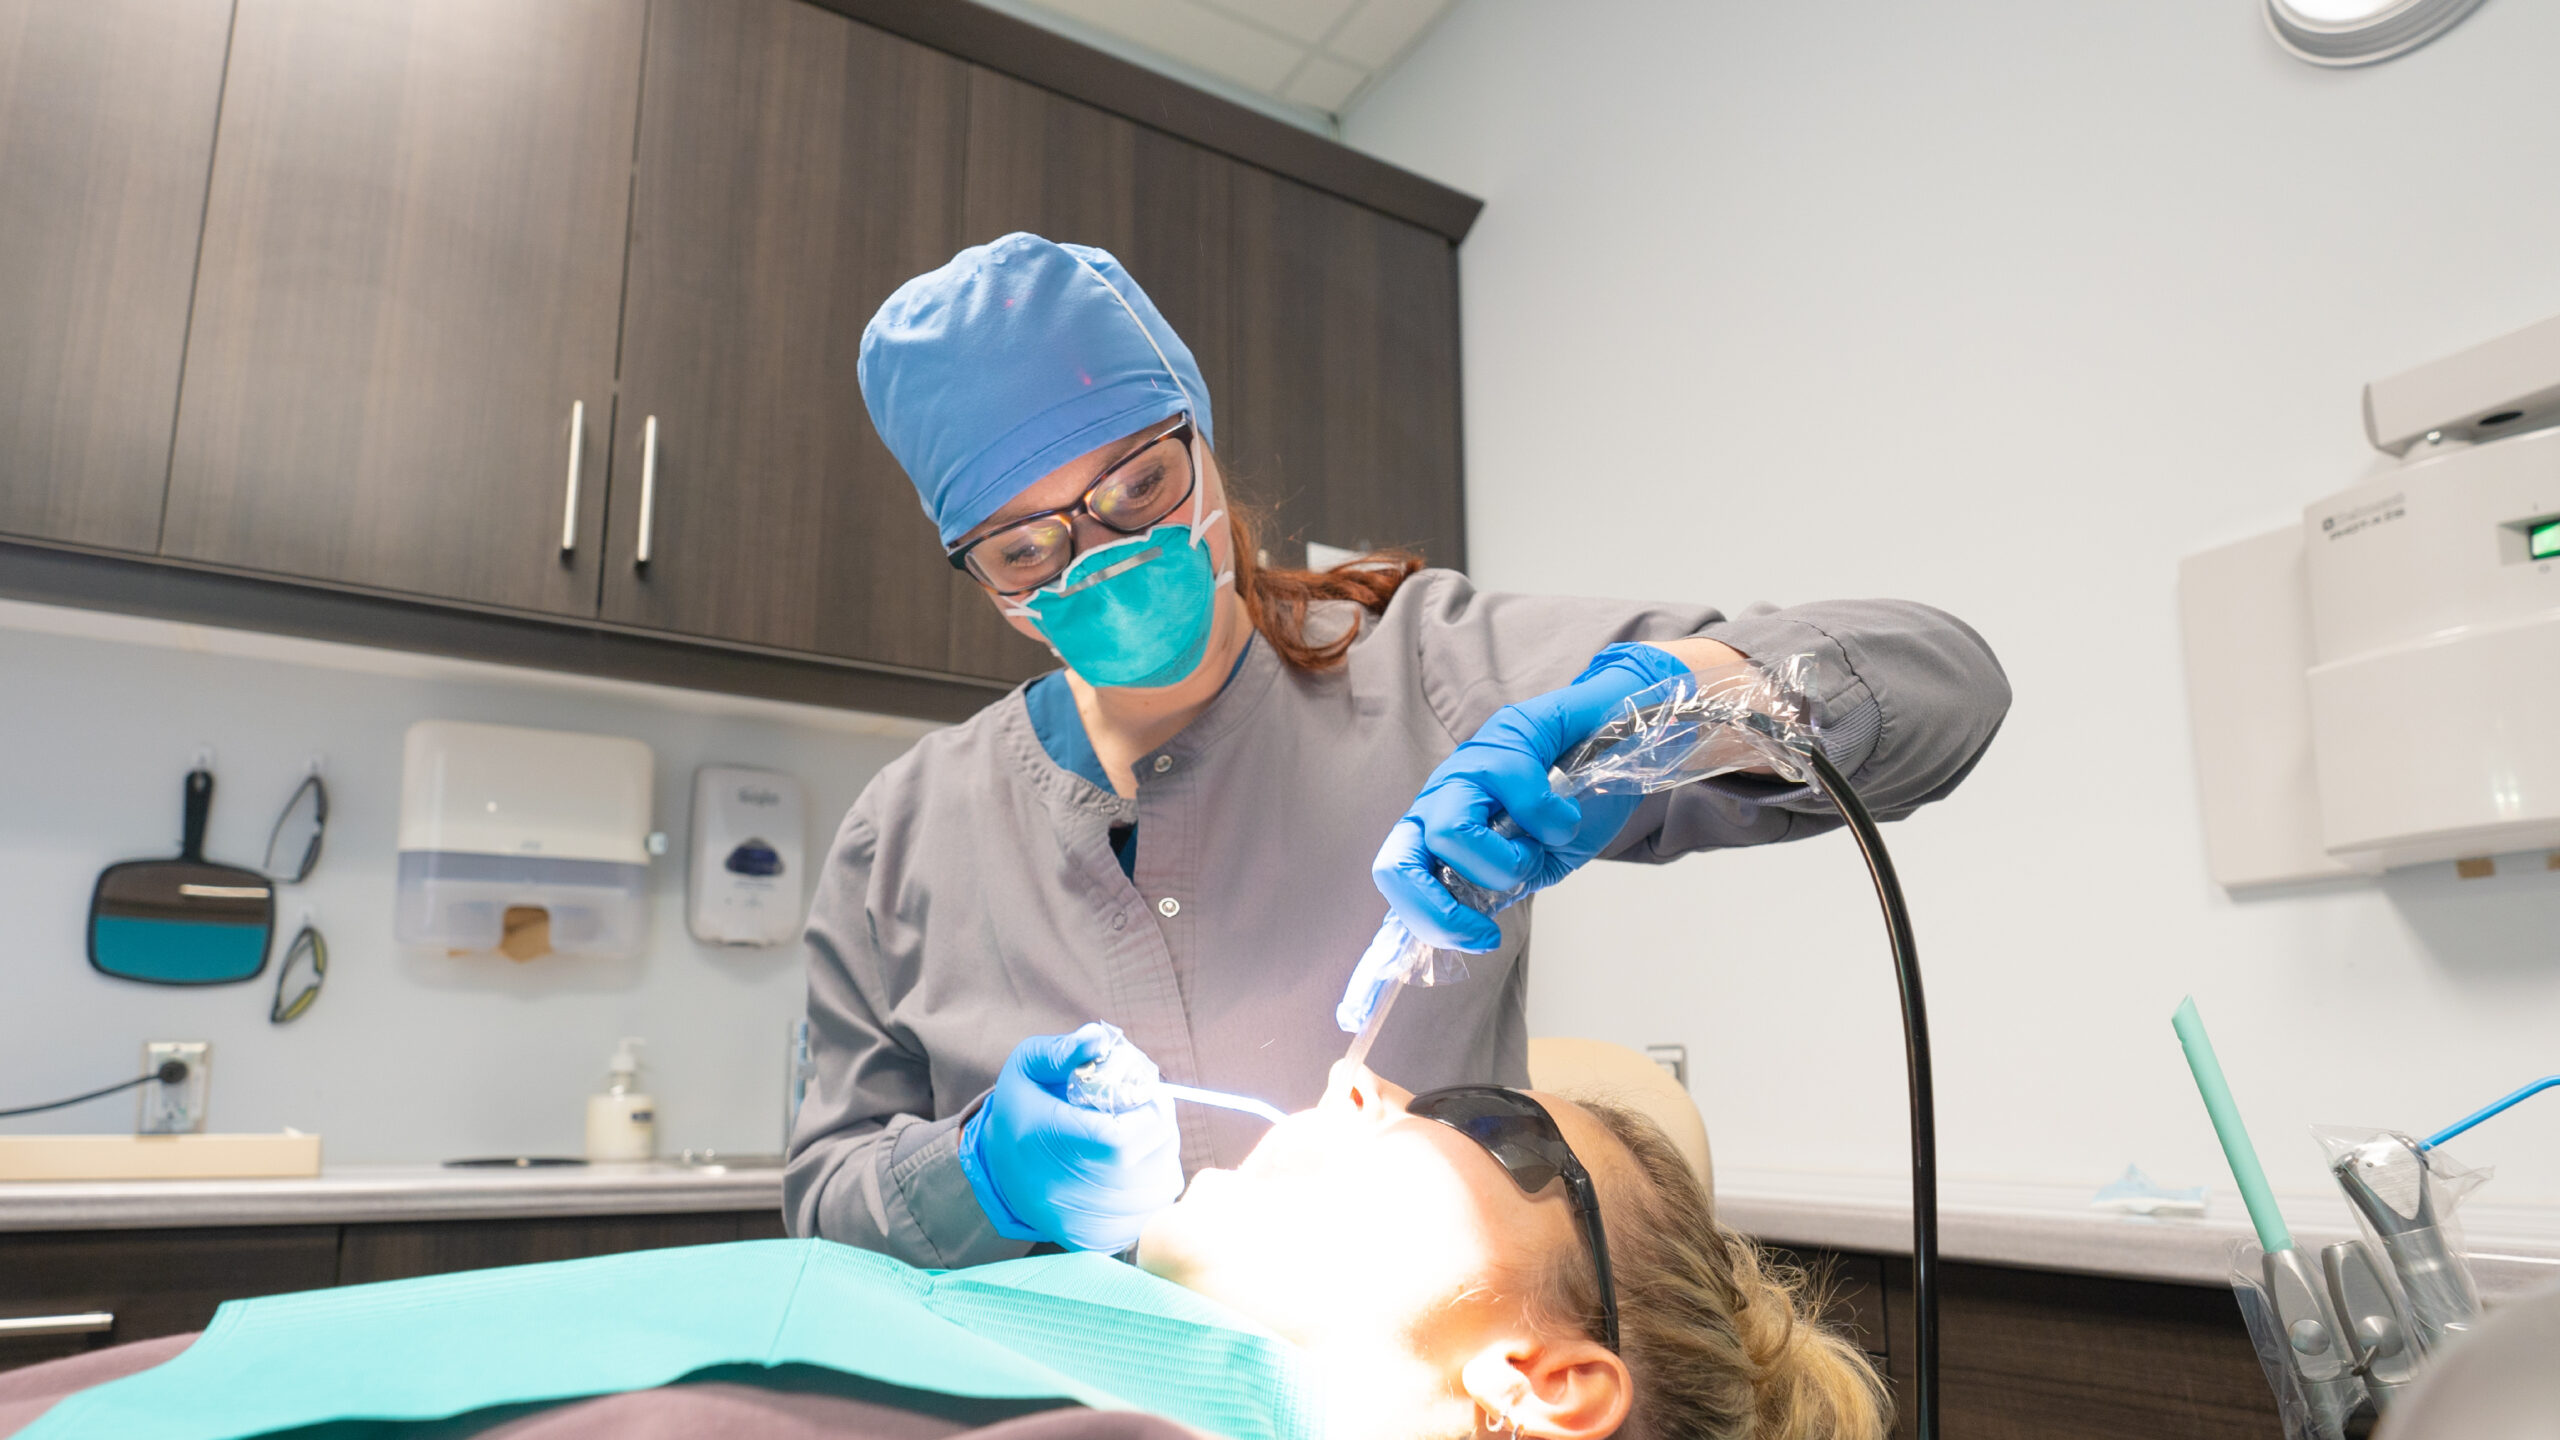 Dental hygienist doing a cleaning on a patient.